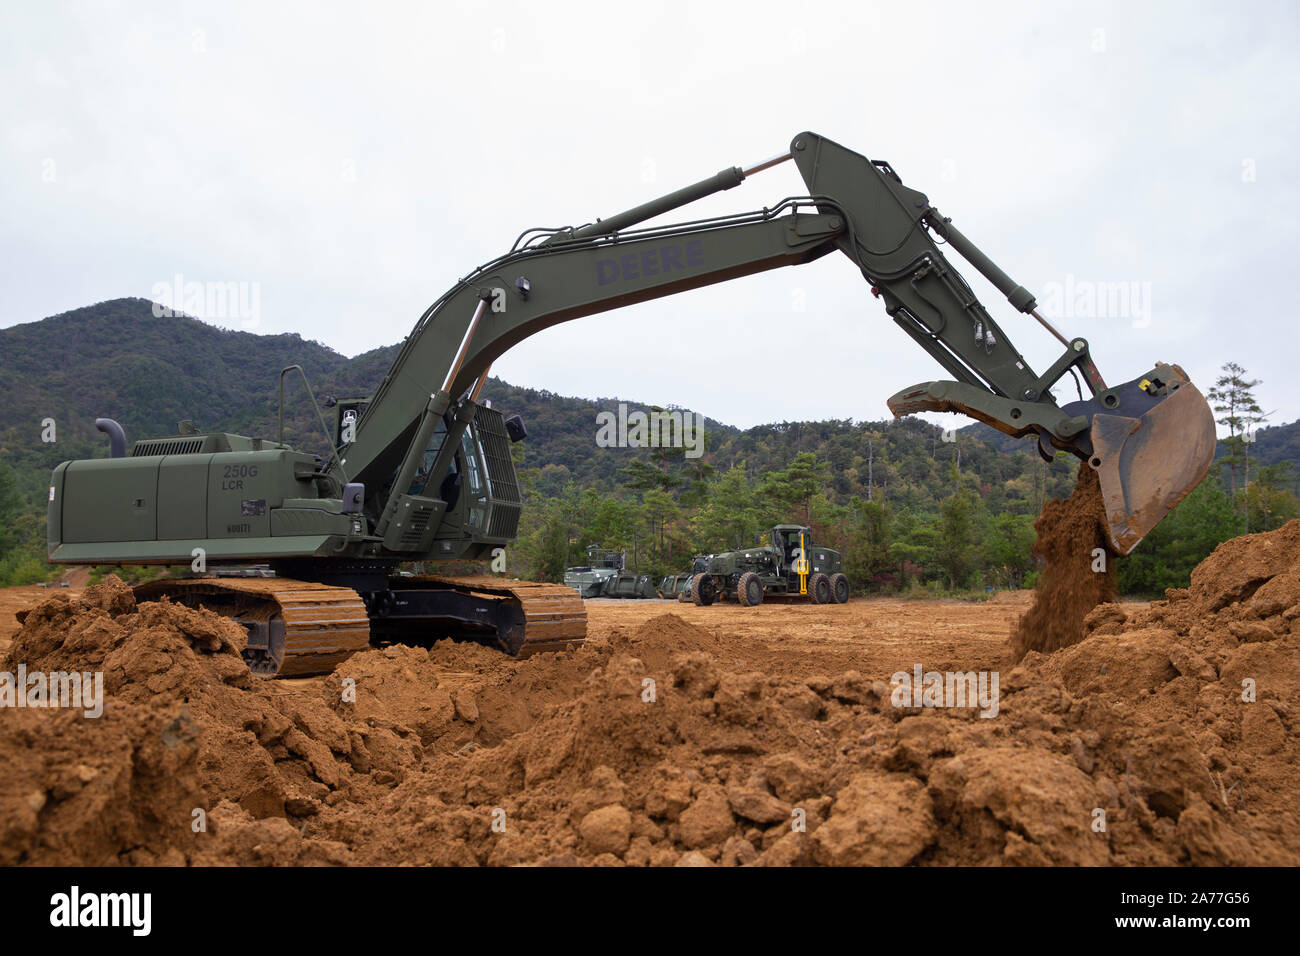 A U.S. Marine Corps Hydraulic Excavator digs a hole for a fortified bunker during Defense Force Training 20.1, at the Japan Ground Self-Defense Force Haramura Maneuver Area, Hiroshima, Japan, Oct. 21, 2019. Exercises like DFT 20.1 provide realistic training to Marines with MWSS-171, where they hone their skills and remain mission ready while being forward-postured in the Indo-Pacific. (U.S. Marine Corps photo by Lance Cpl. Tyler Harmon) Stock Photo